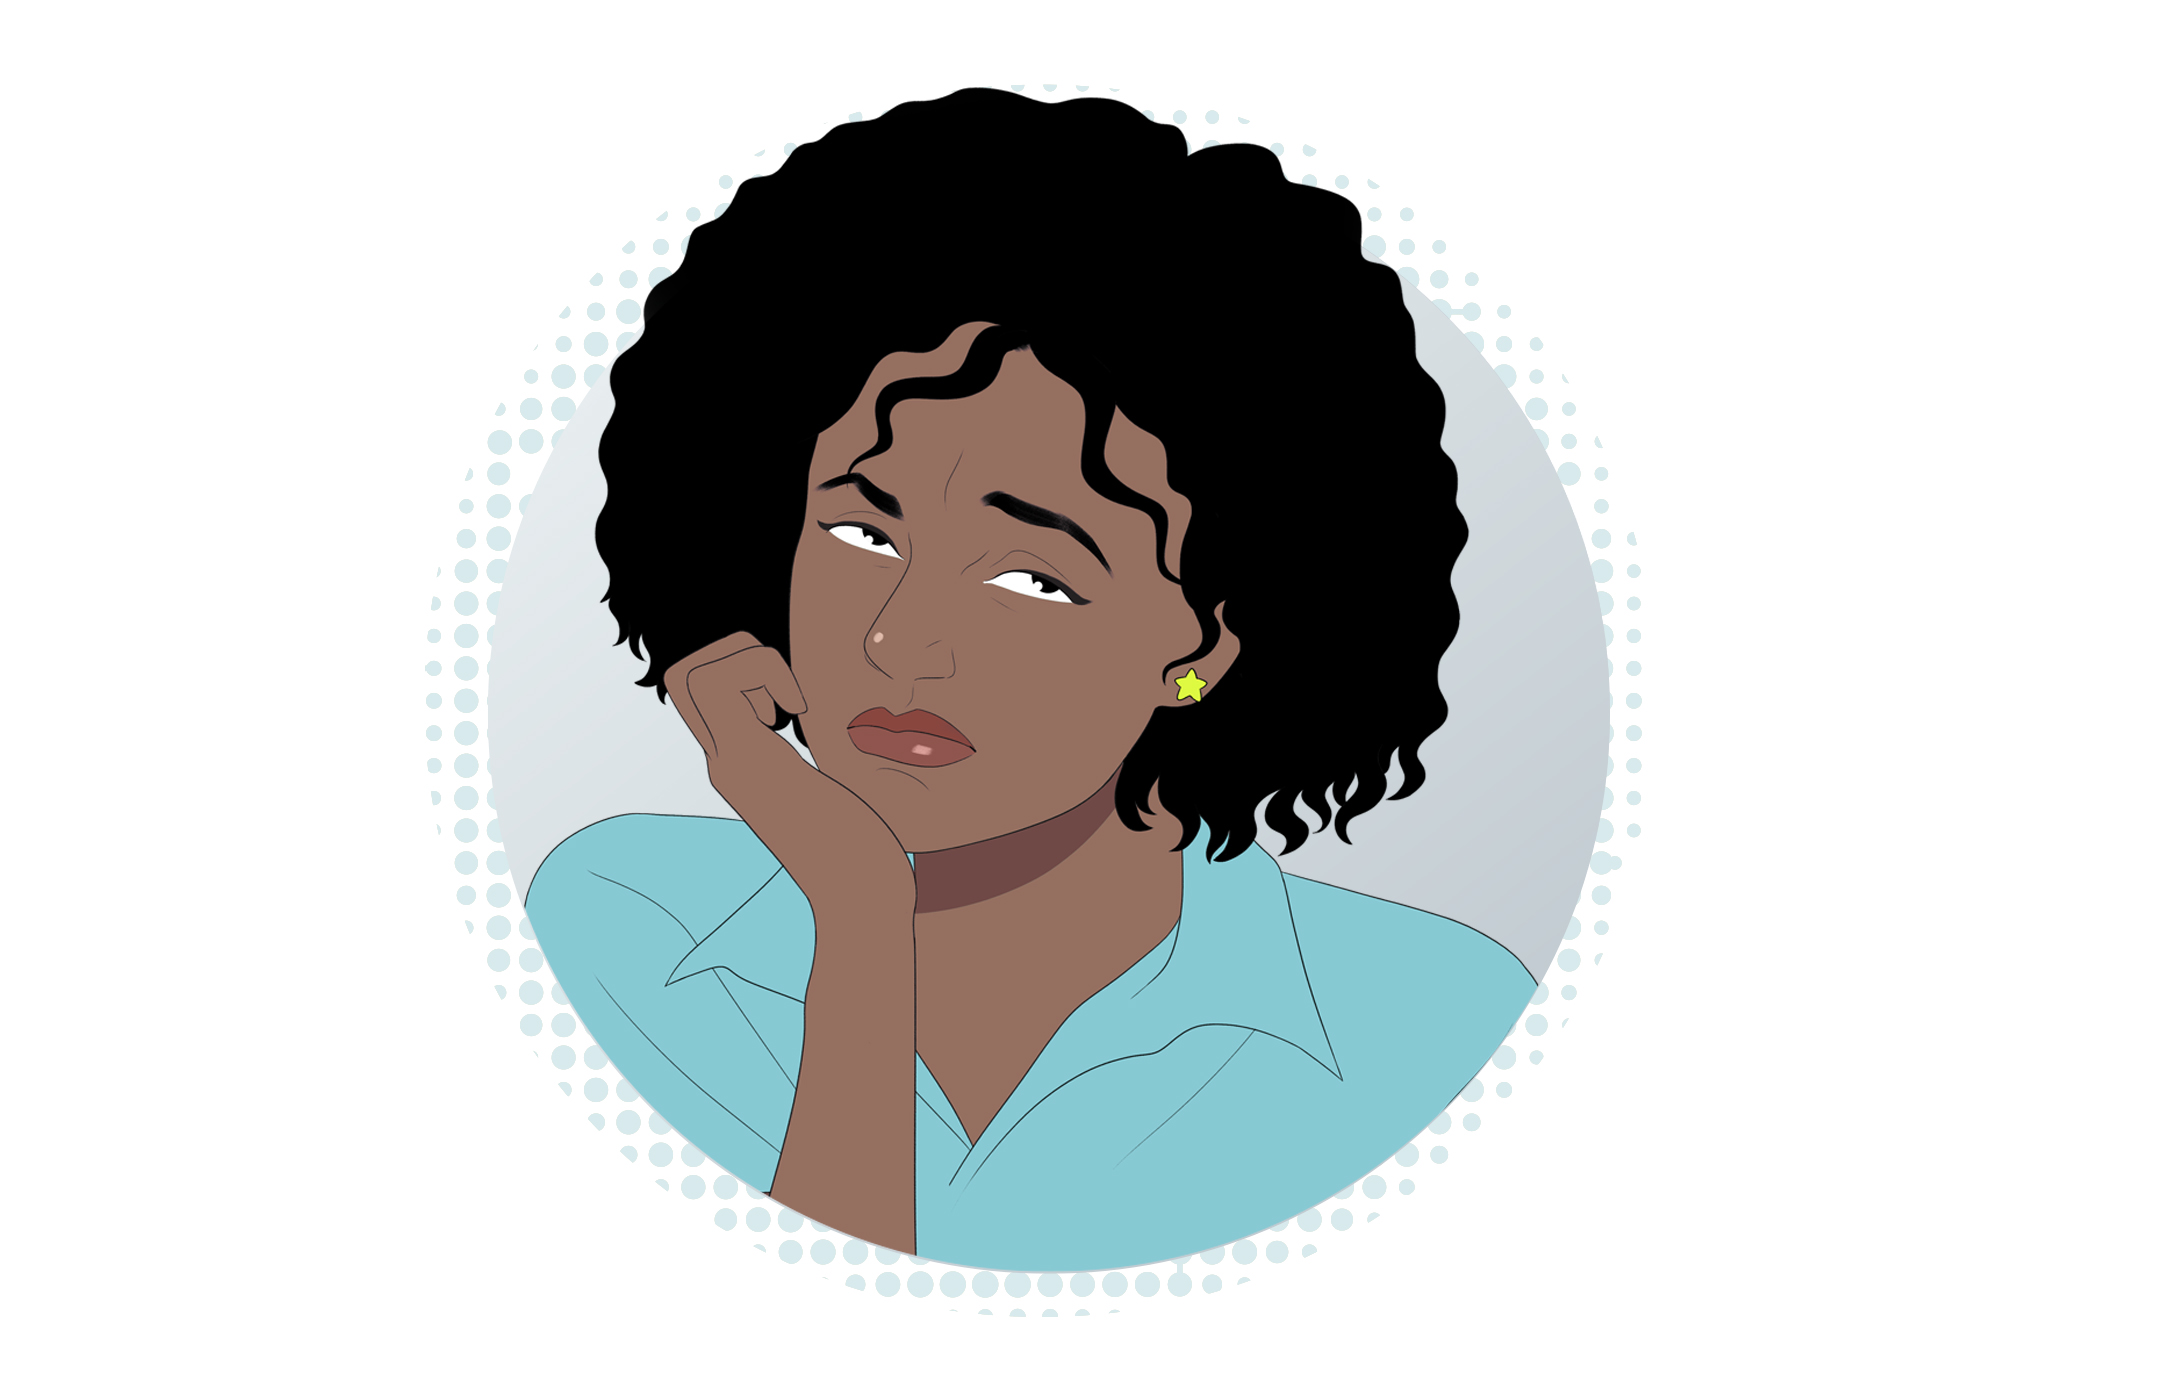 Illustrated image of a woman looking somewhat bummed.